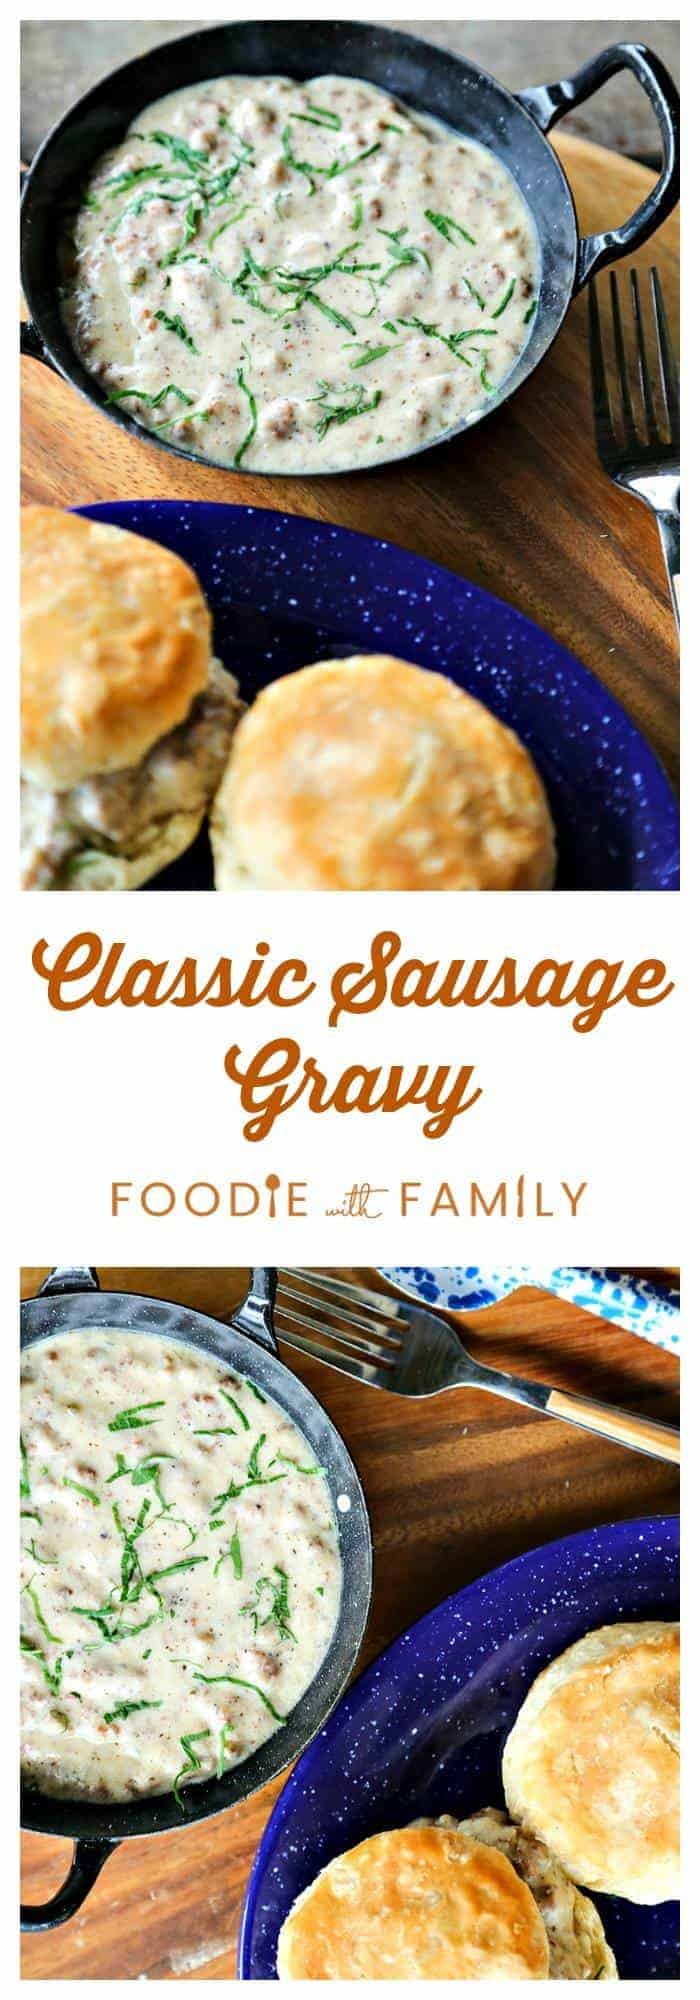 Classic Sausage Gravy will never win any accolades for being beautiful, but it is ultimately comforting and beyond simple.